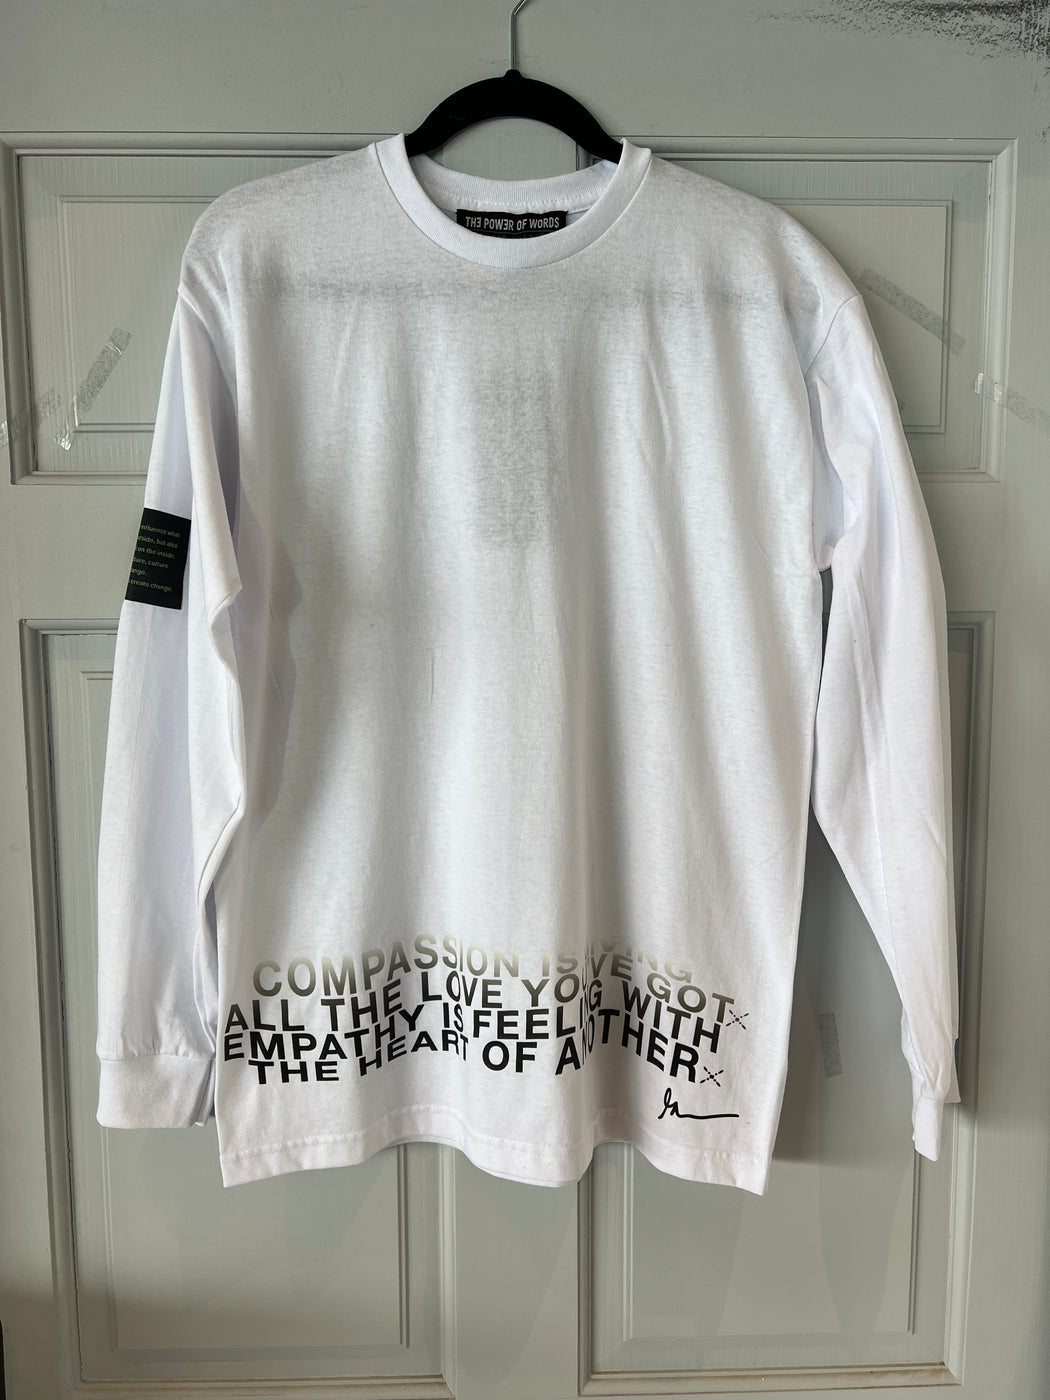 Unisex Compassion Crewneck Long sleeve tee shirt in White